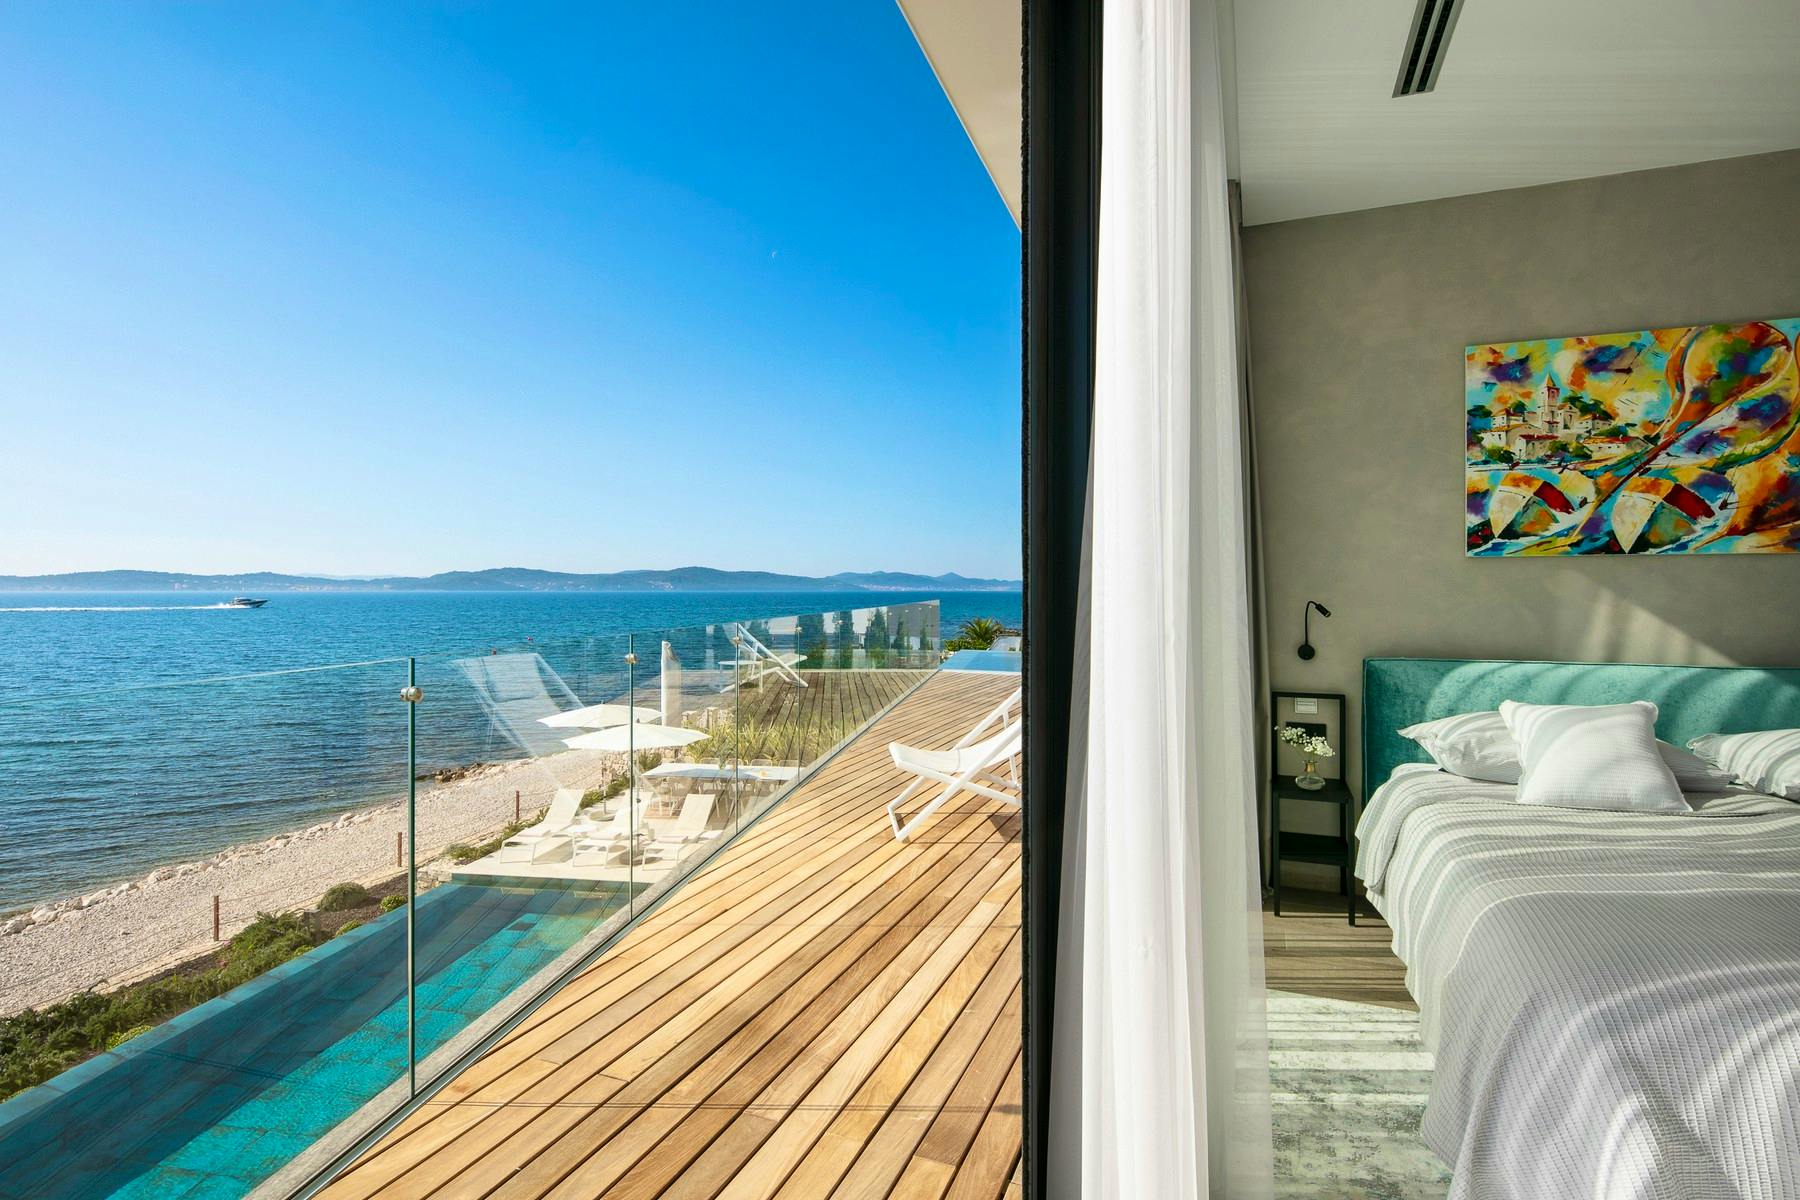 Ensuite bedroom with a terrace overlooking the sea